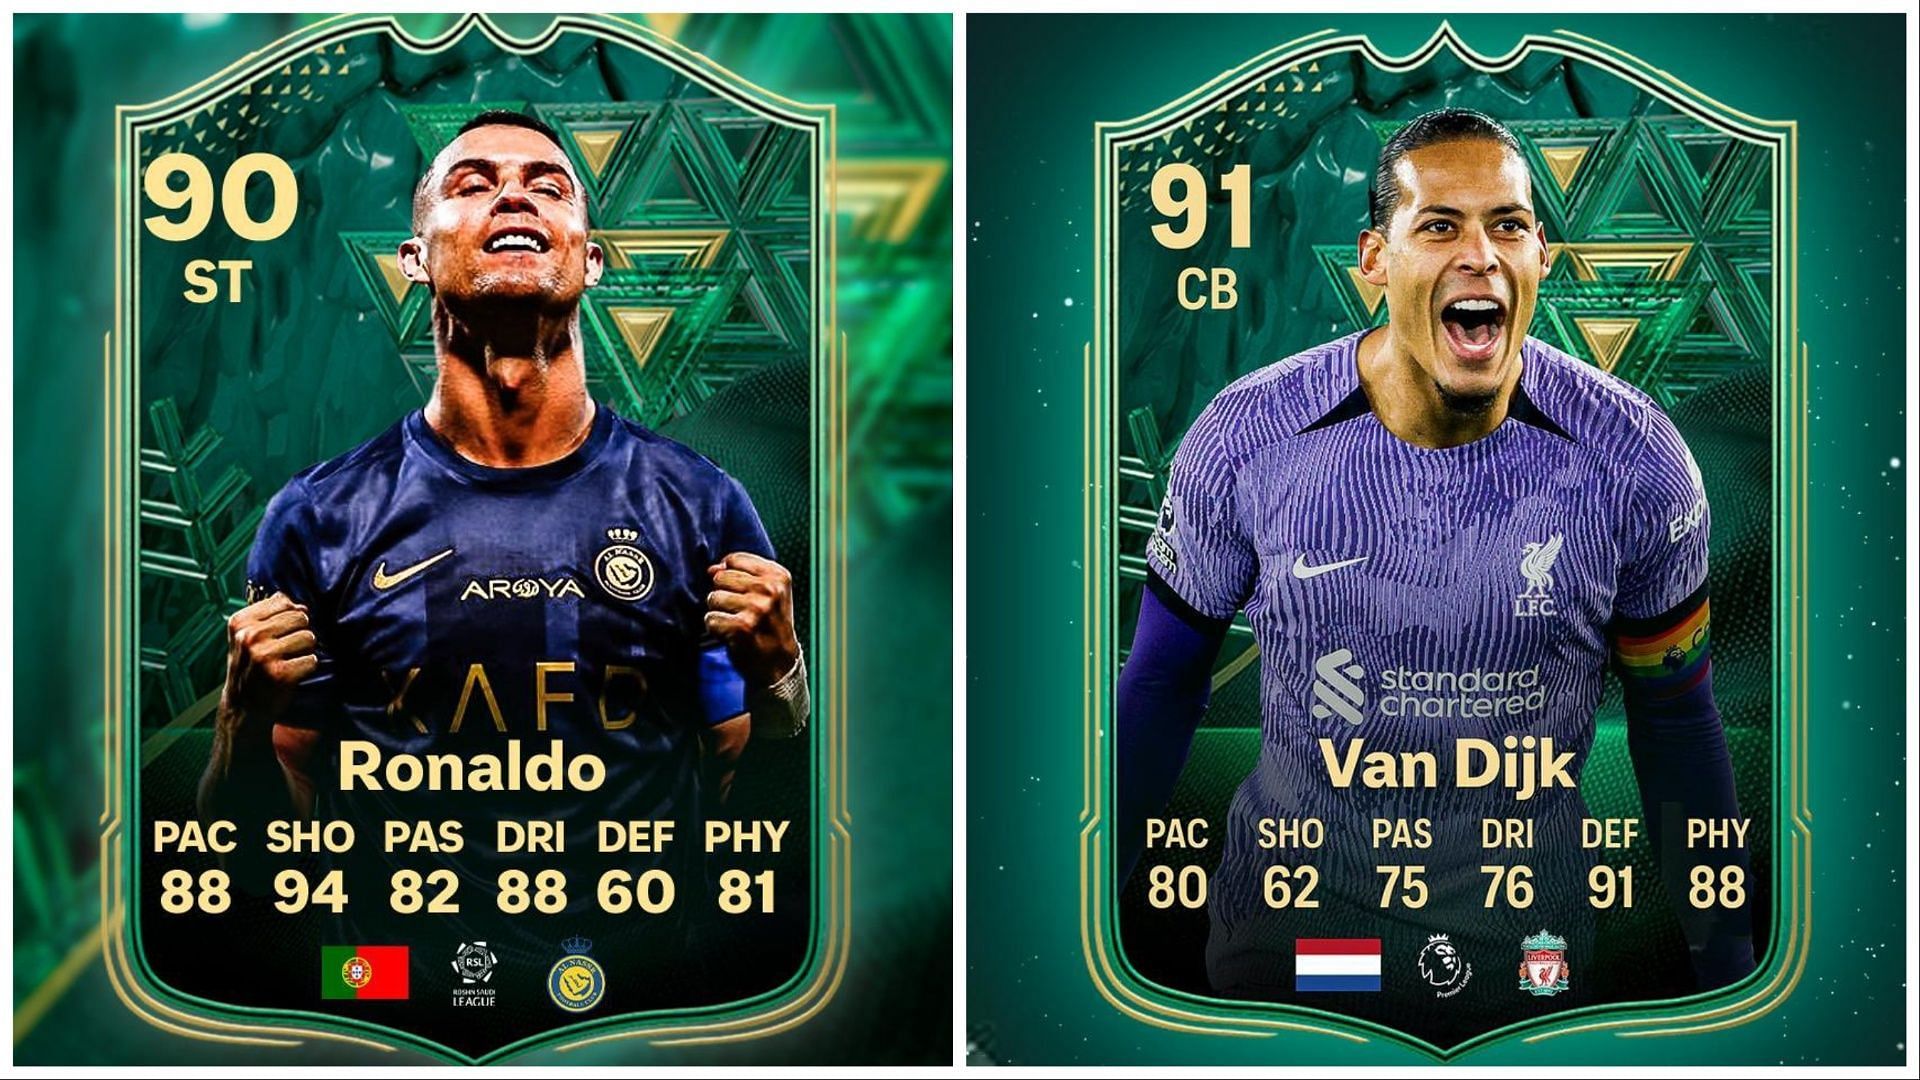 Winter Wildcards Ronaldo and Van Dijk have been leaked (Images via FIFATradingRomania and FUT Sheriff on Twitter)